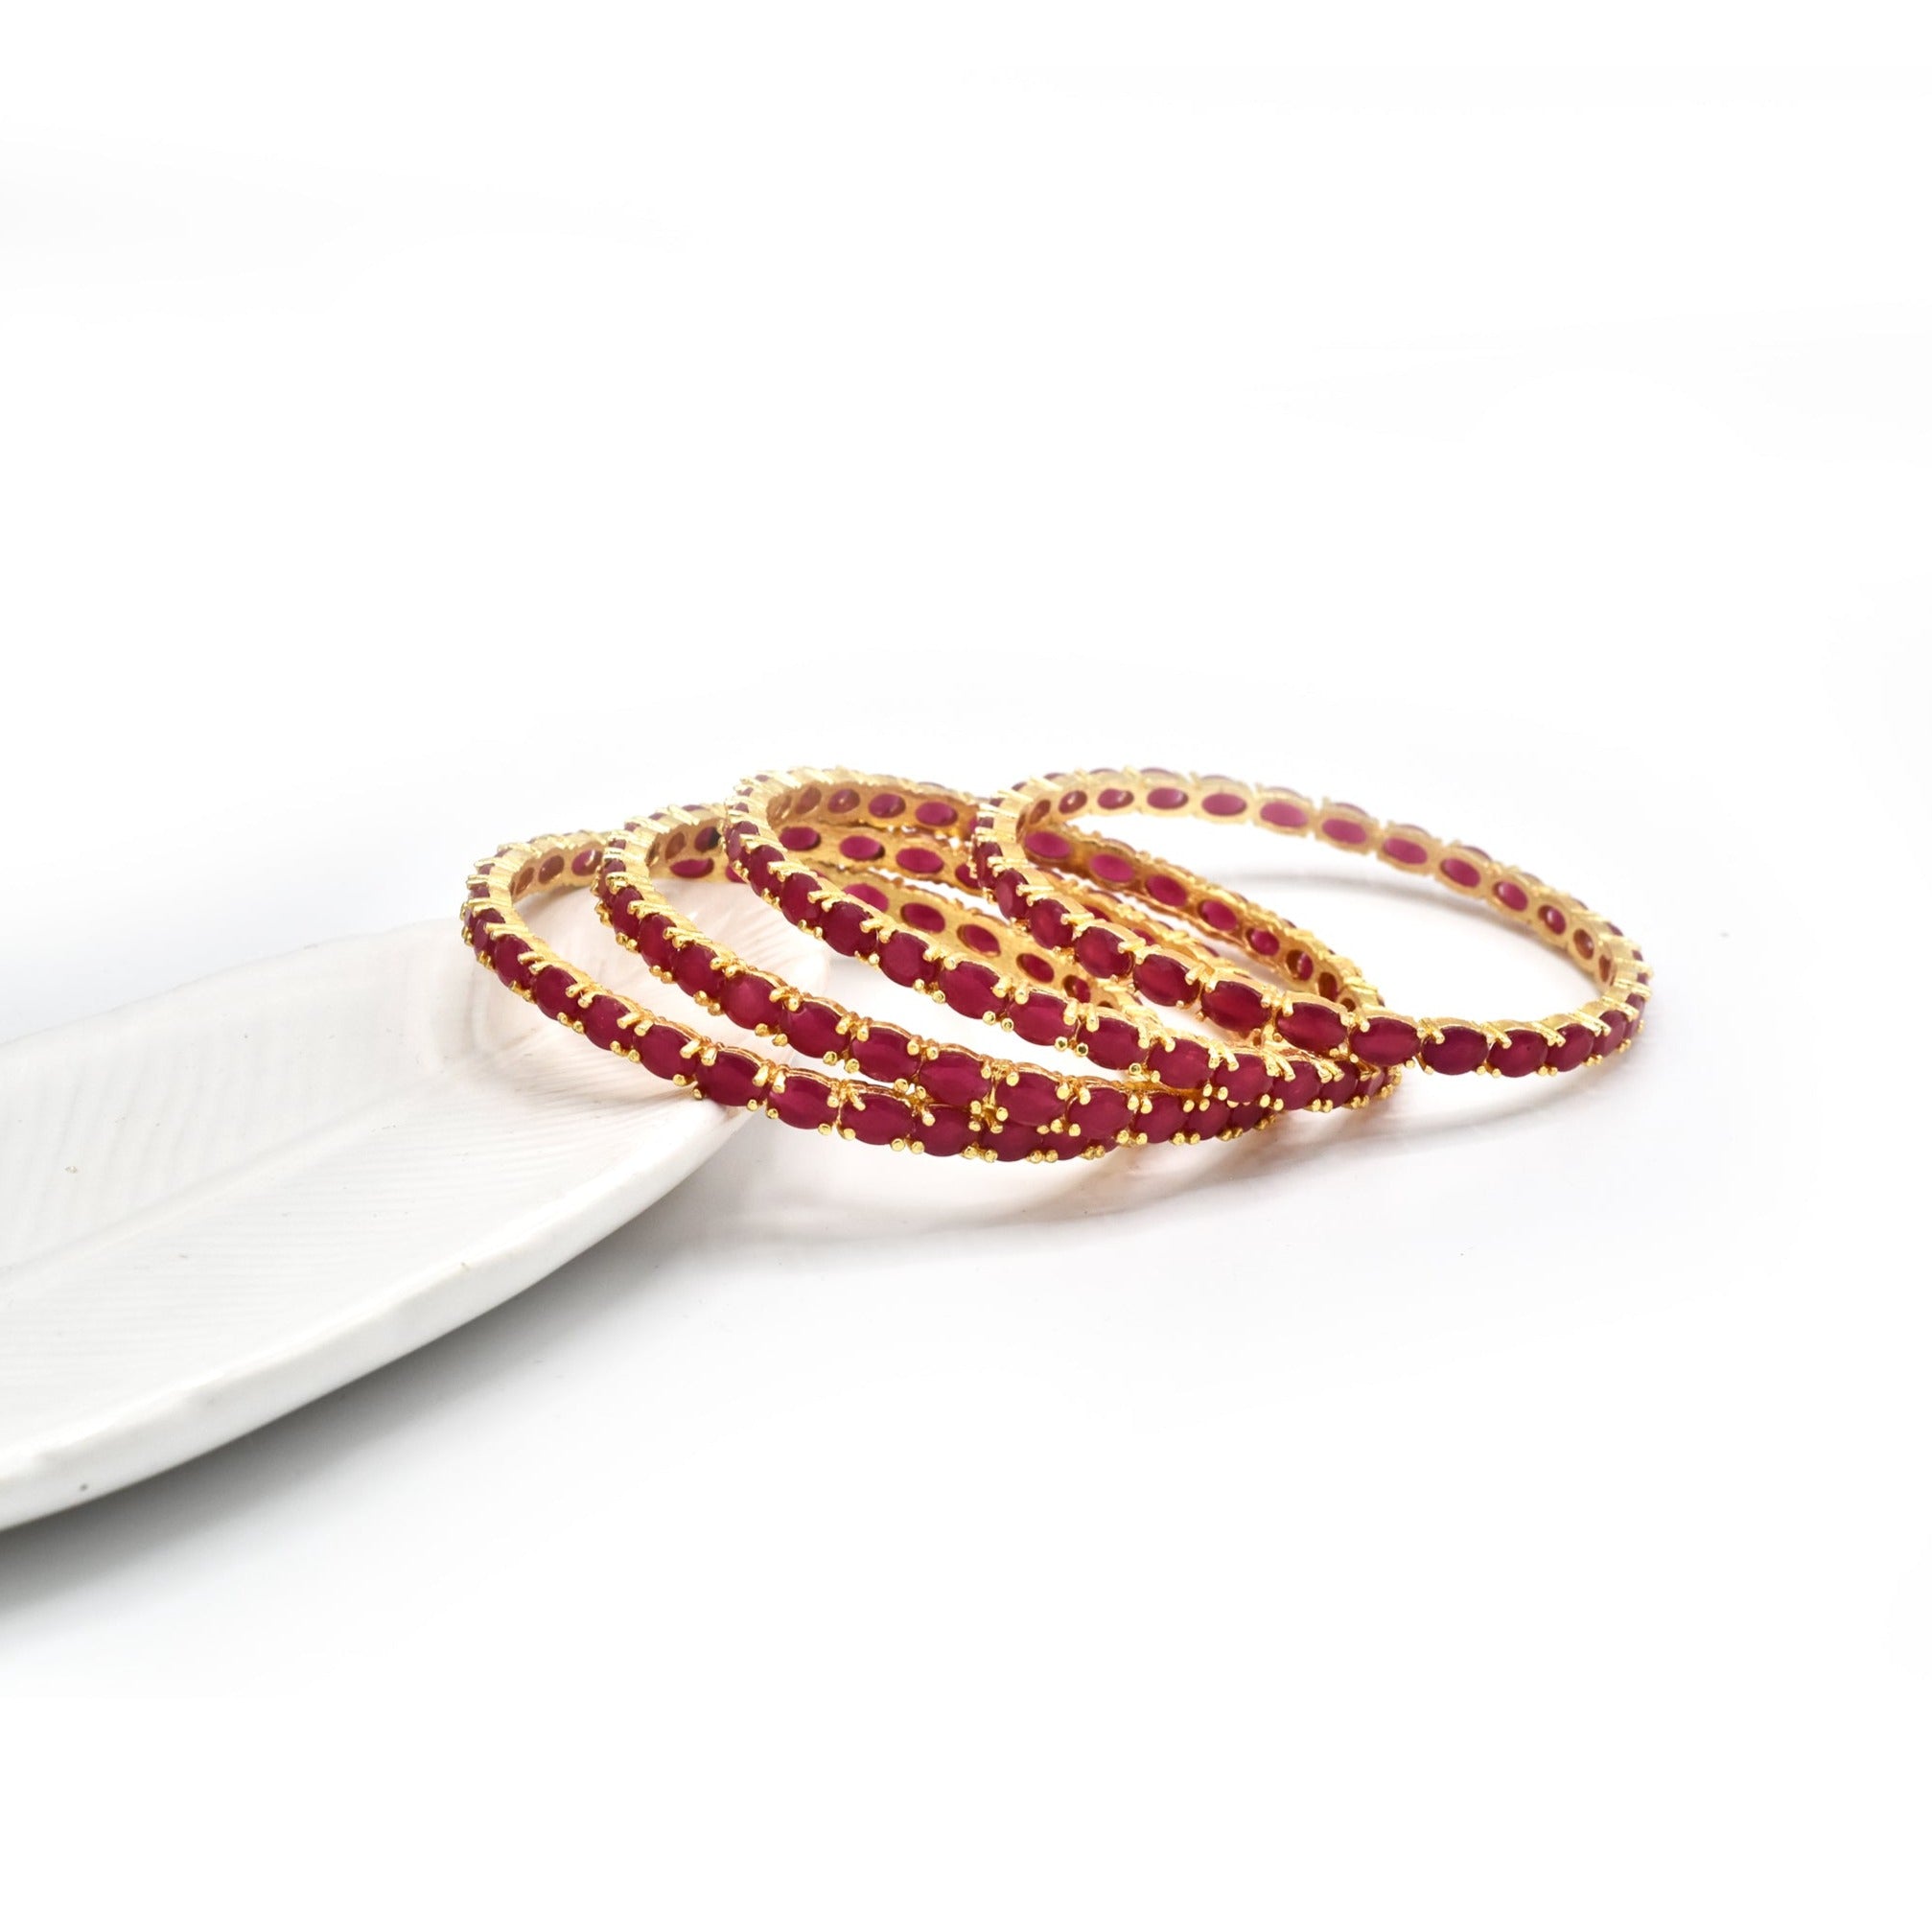 Colored Stones Bangles - Red - The Pashm